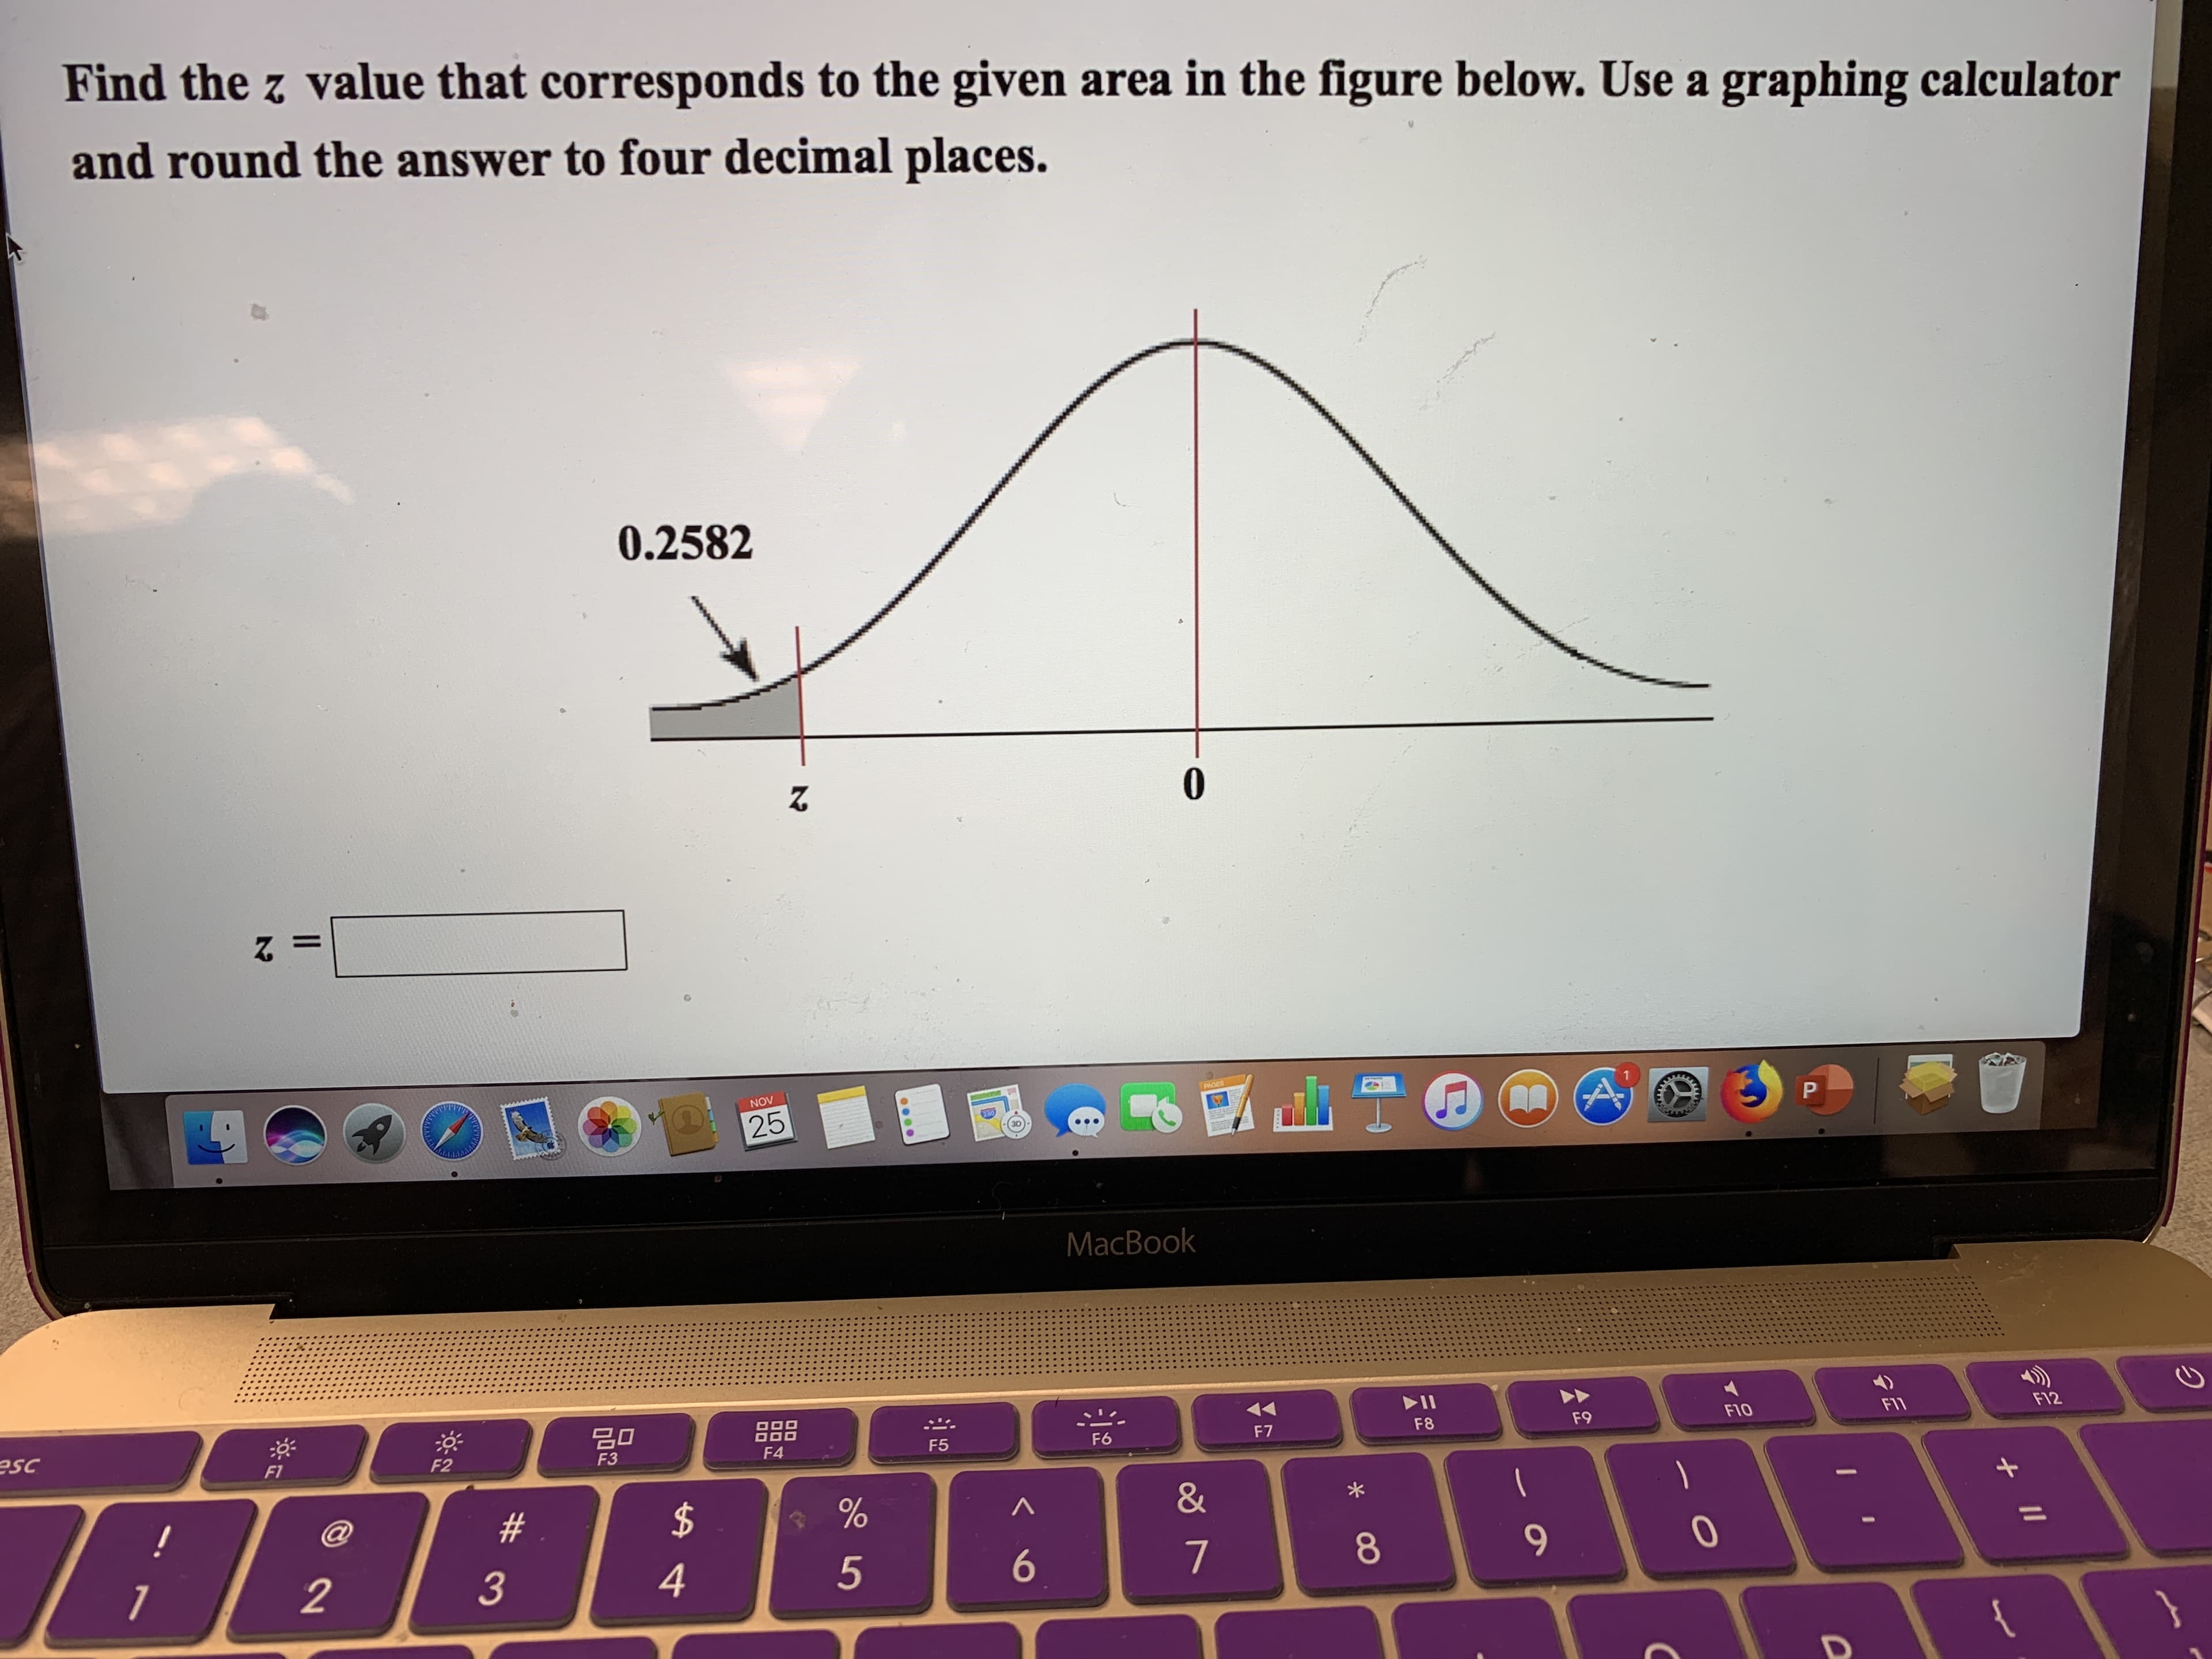 Find the z value that corresponds to the given area in the figure below. Use a graphing calculator
and round the answer to four decimal places.
0.2582
0
A
PACES
NOV
P
25
MacBook
딤미
F12
F1
FIO
F9
F8
esc
F7
F6
F5
F4
F3
F2
F1
&
$
#
@
!
7
4
3
2
II
